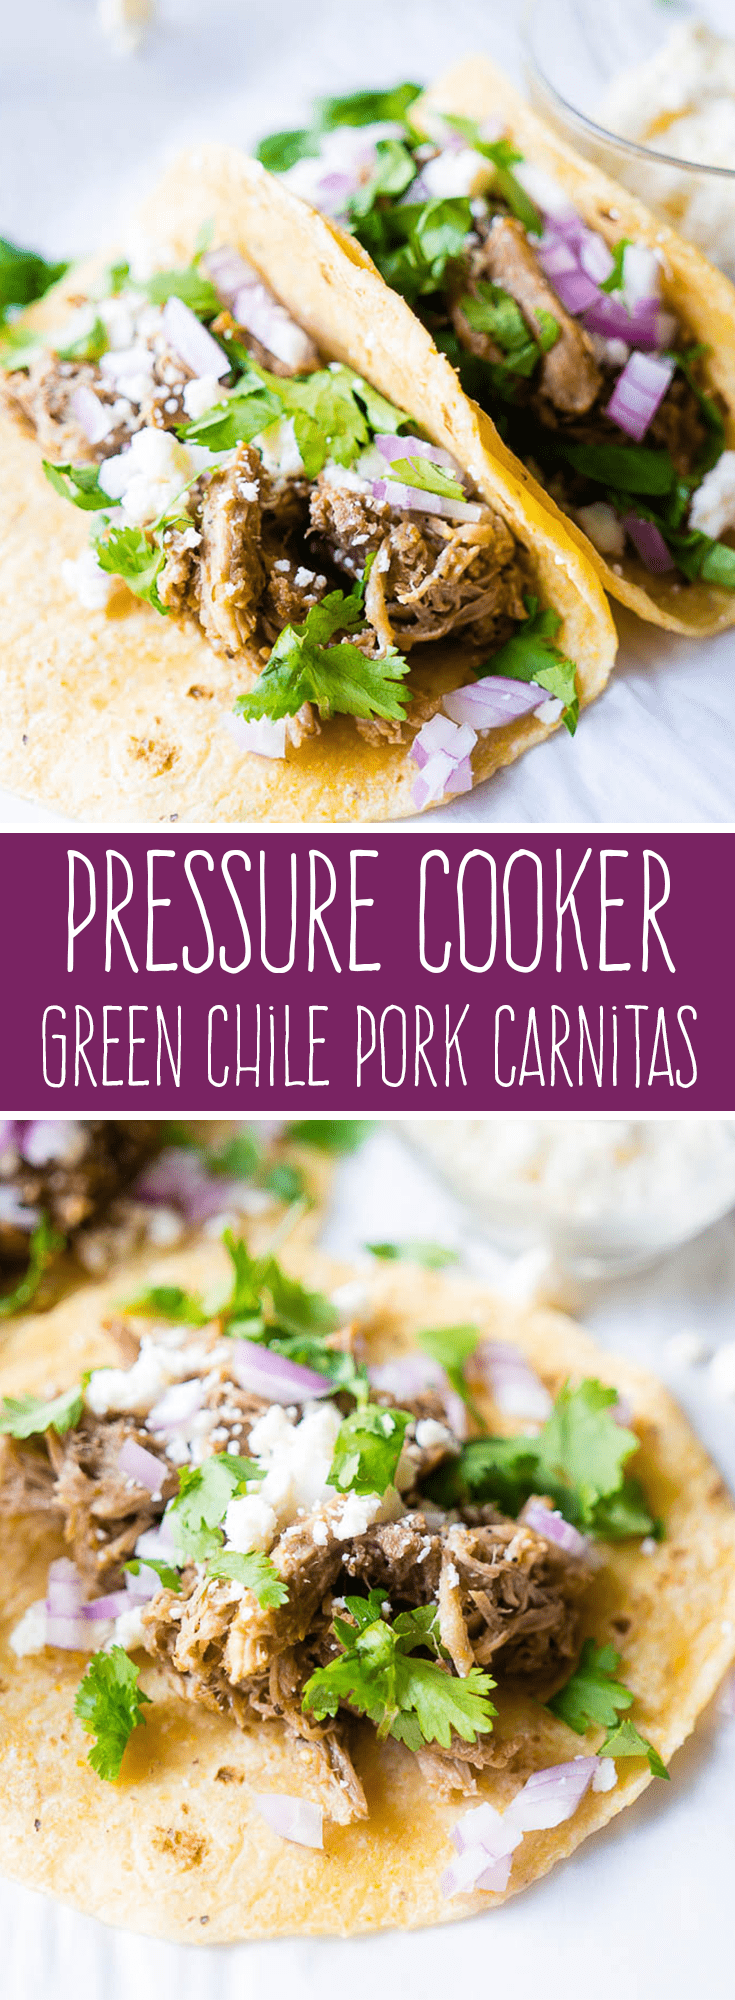 Green chile pork carnitas made in an Instant Pot come out flavorful, moist, and perfectly tender every time, and in minutes, not hours! This Pressure Cooker Green Chile Pork Carnitas recipe is the perfect solution for a speedy family friendly dinner! #instantpot #pressurecooker #mexicanfood #carnitas via @PressureCook2da